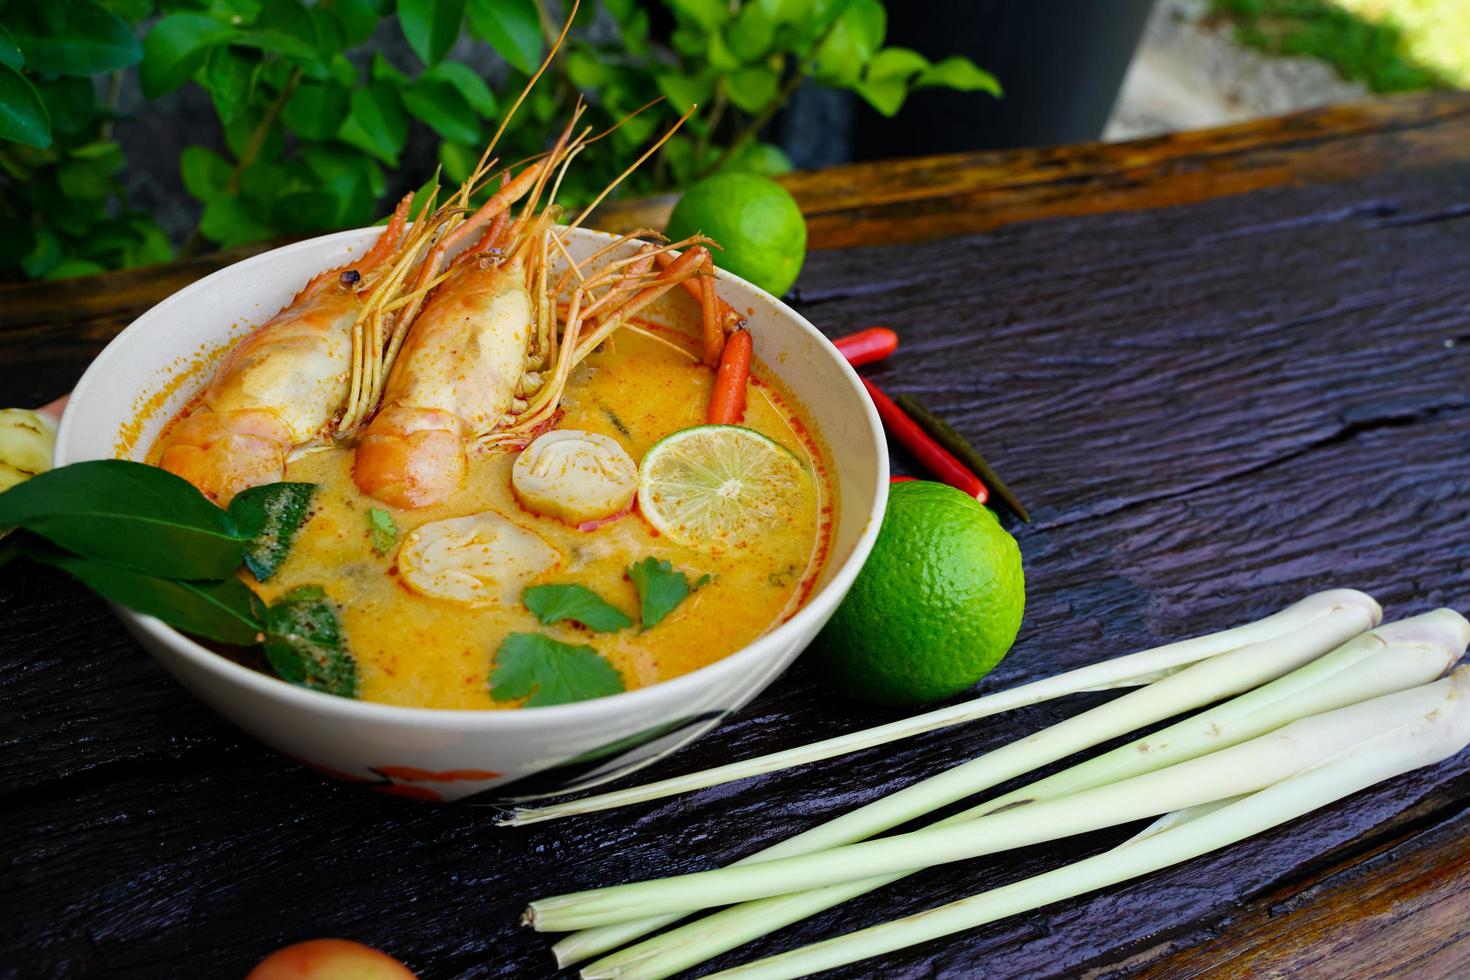 Tom yum kung in a cup on a wooden floor, Tom yum kung is also the national dish of Thailand.  And is a food that is famous all over the world. photo